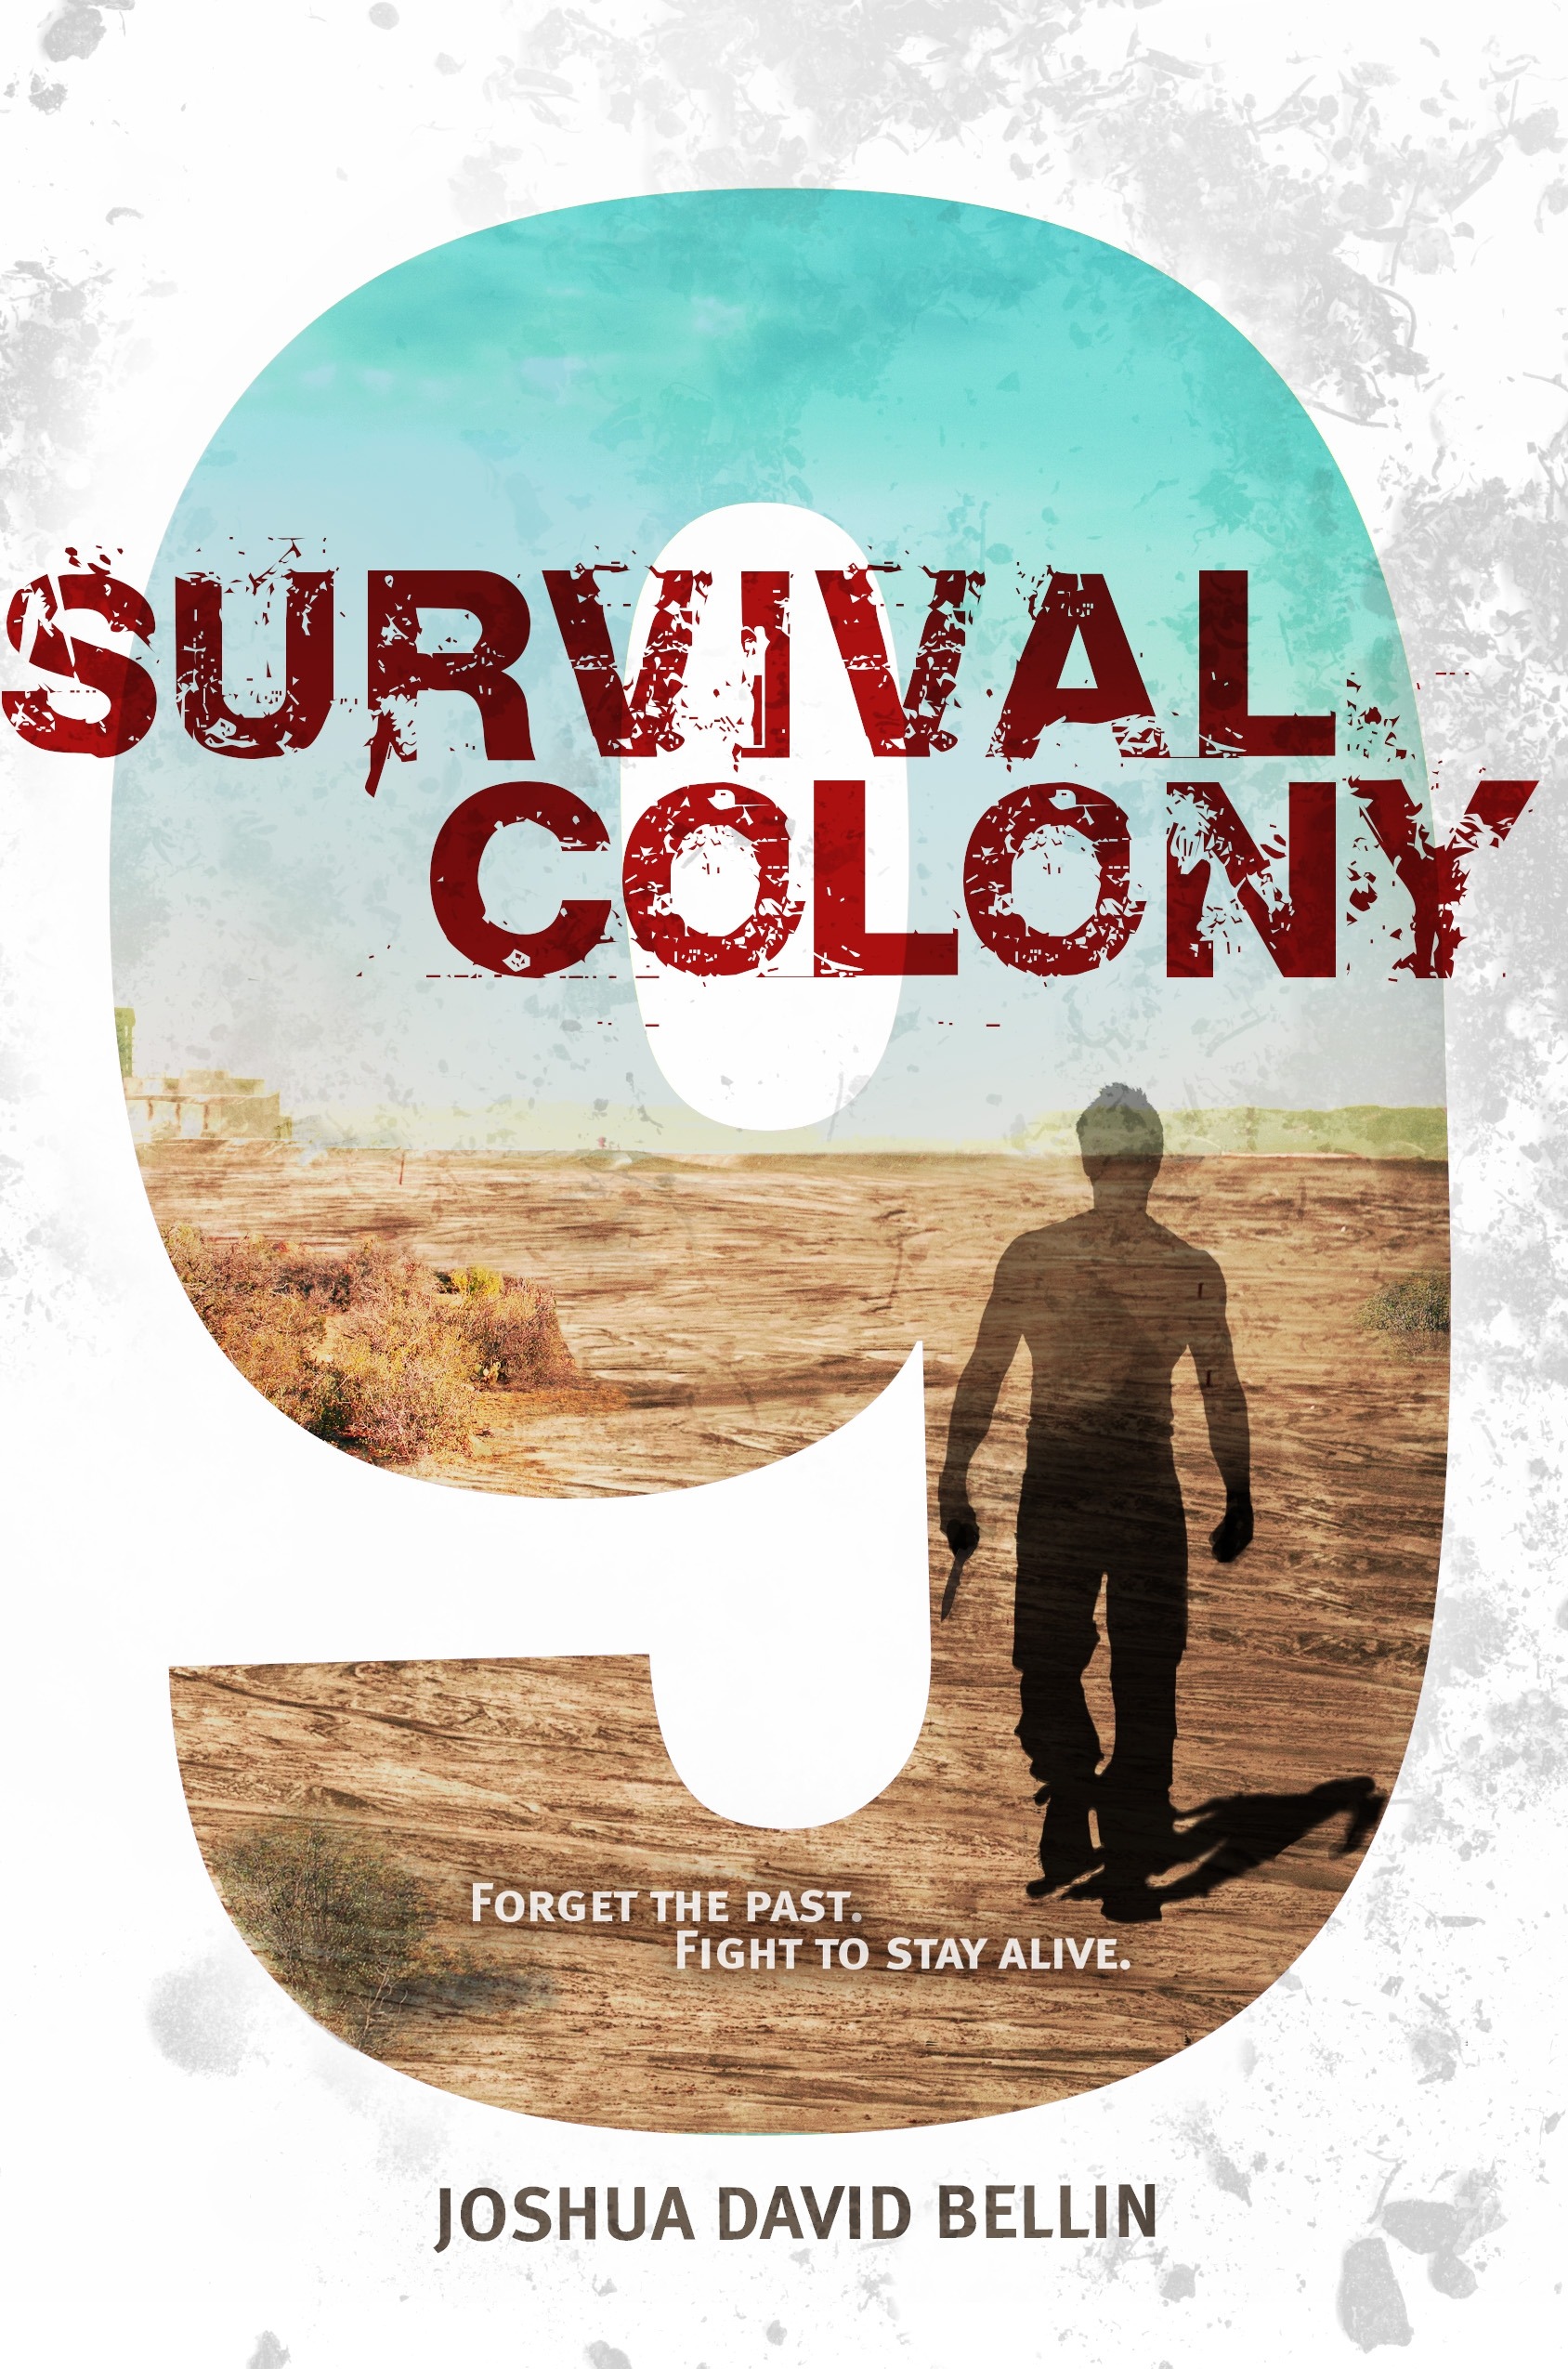 Survival Colony 9 was his first published novel